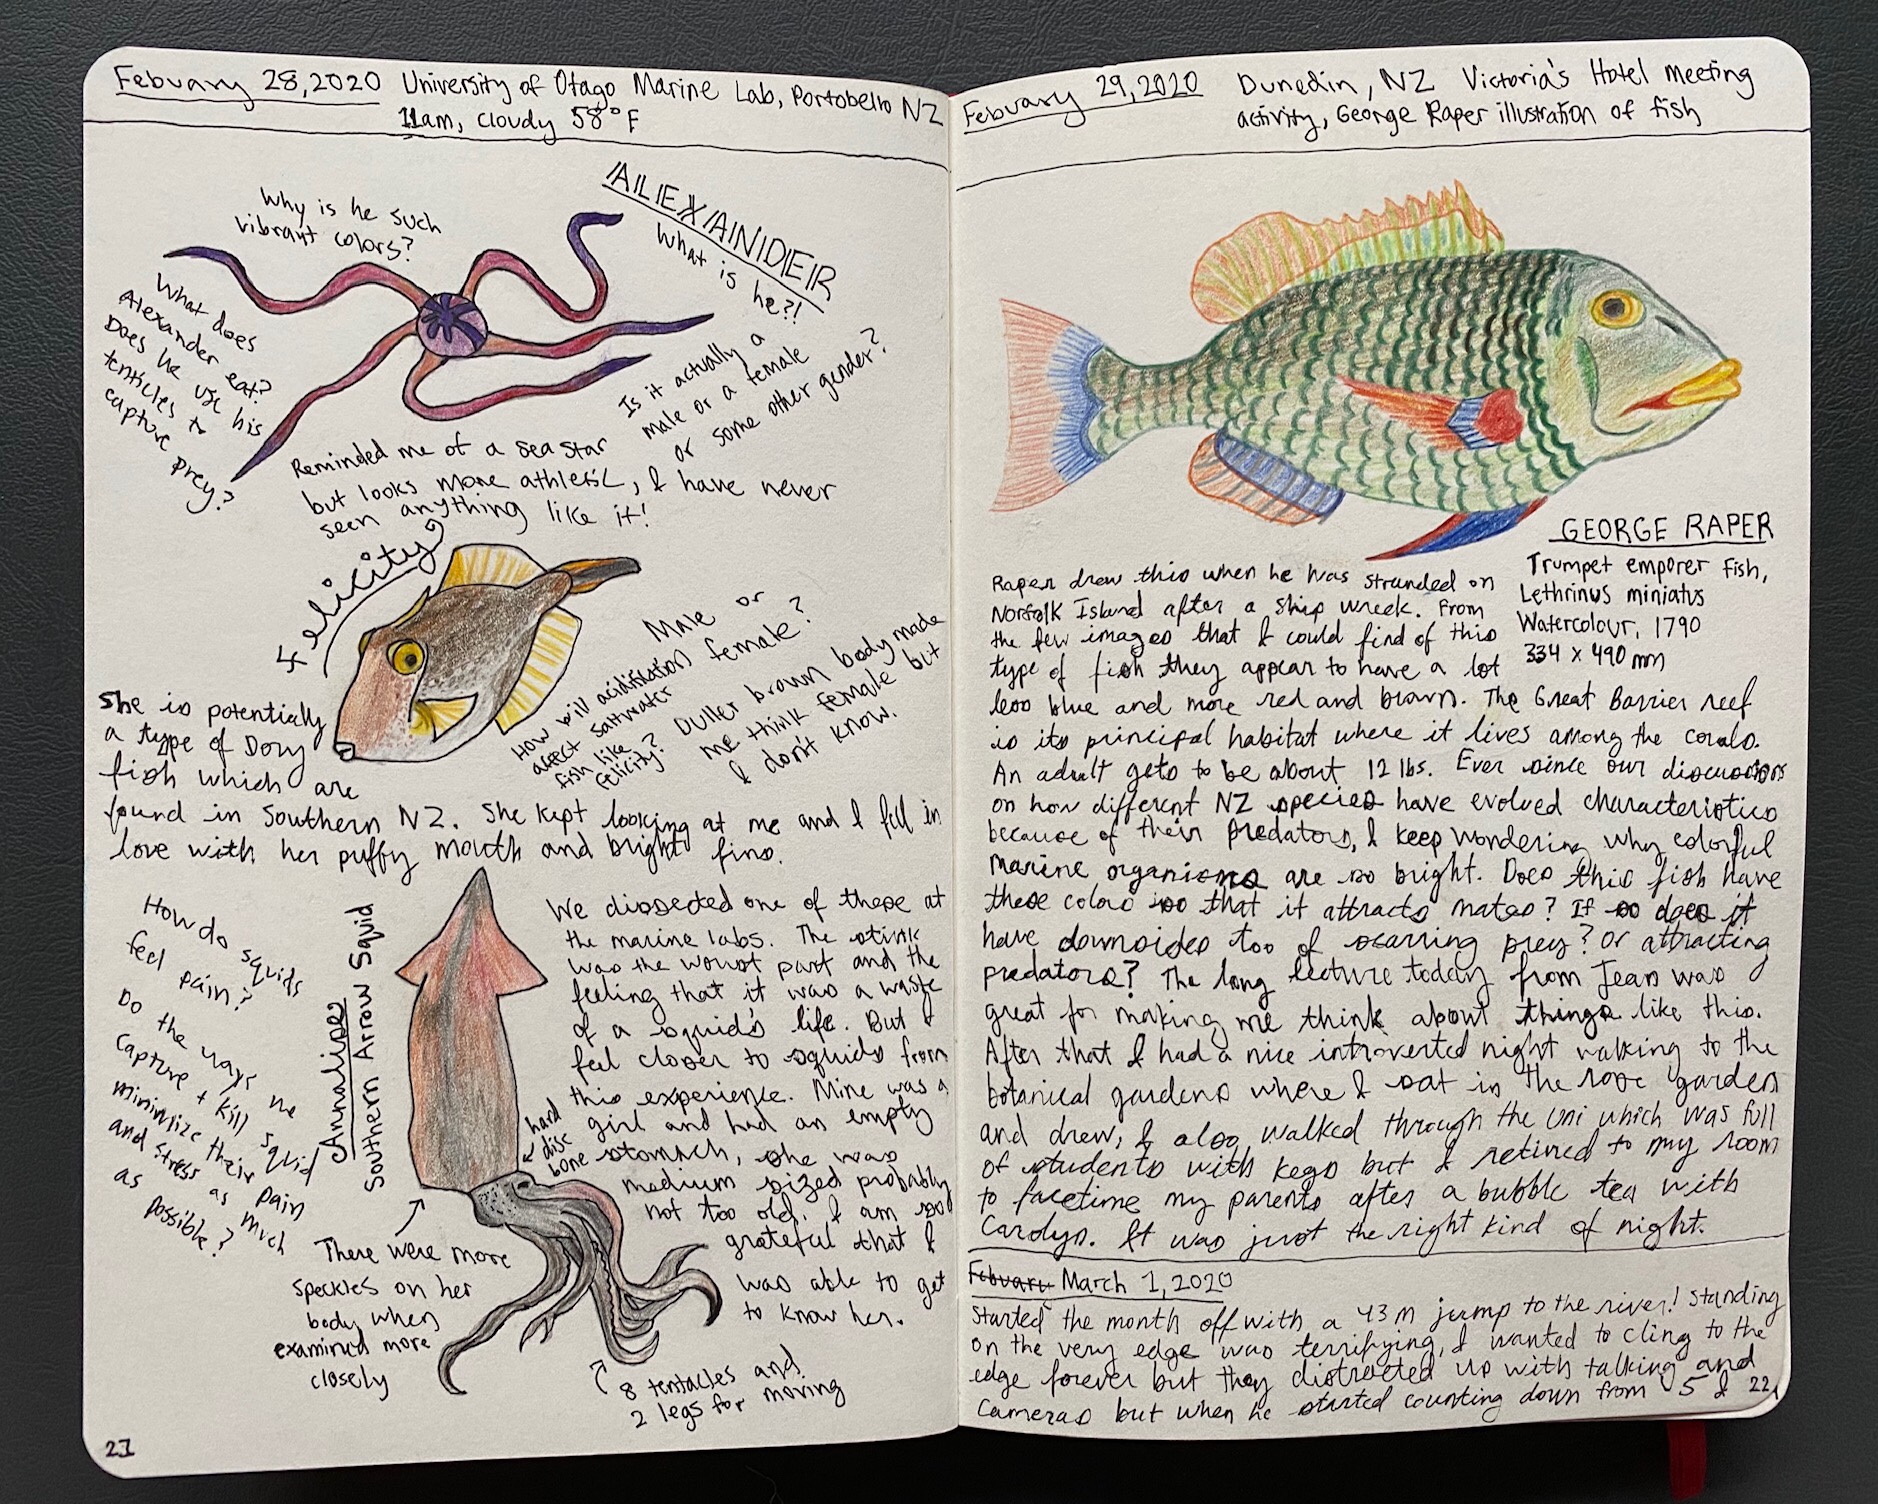 Field drawing of an array of sea creatures